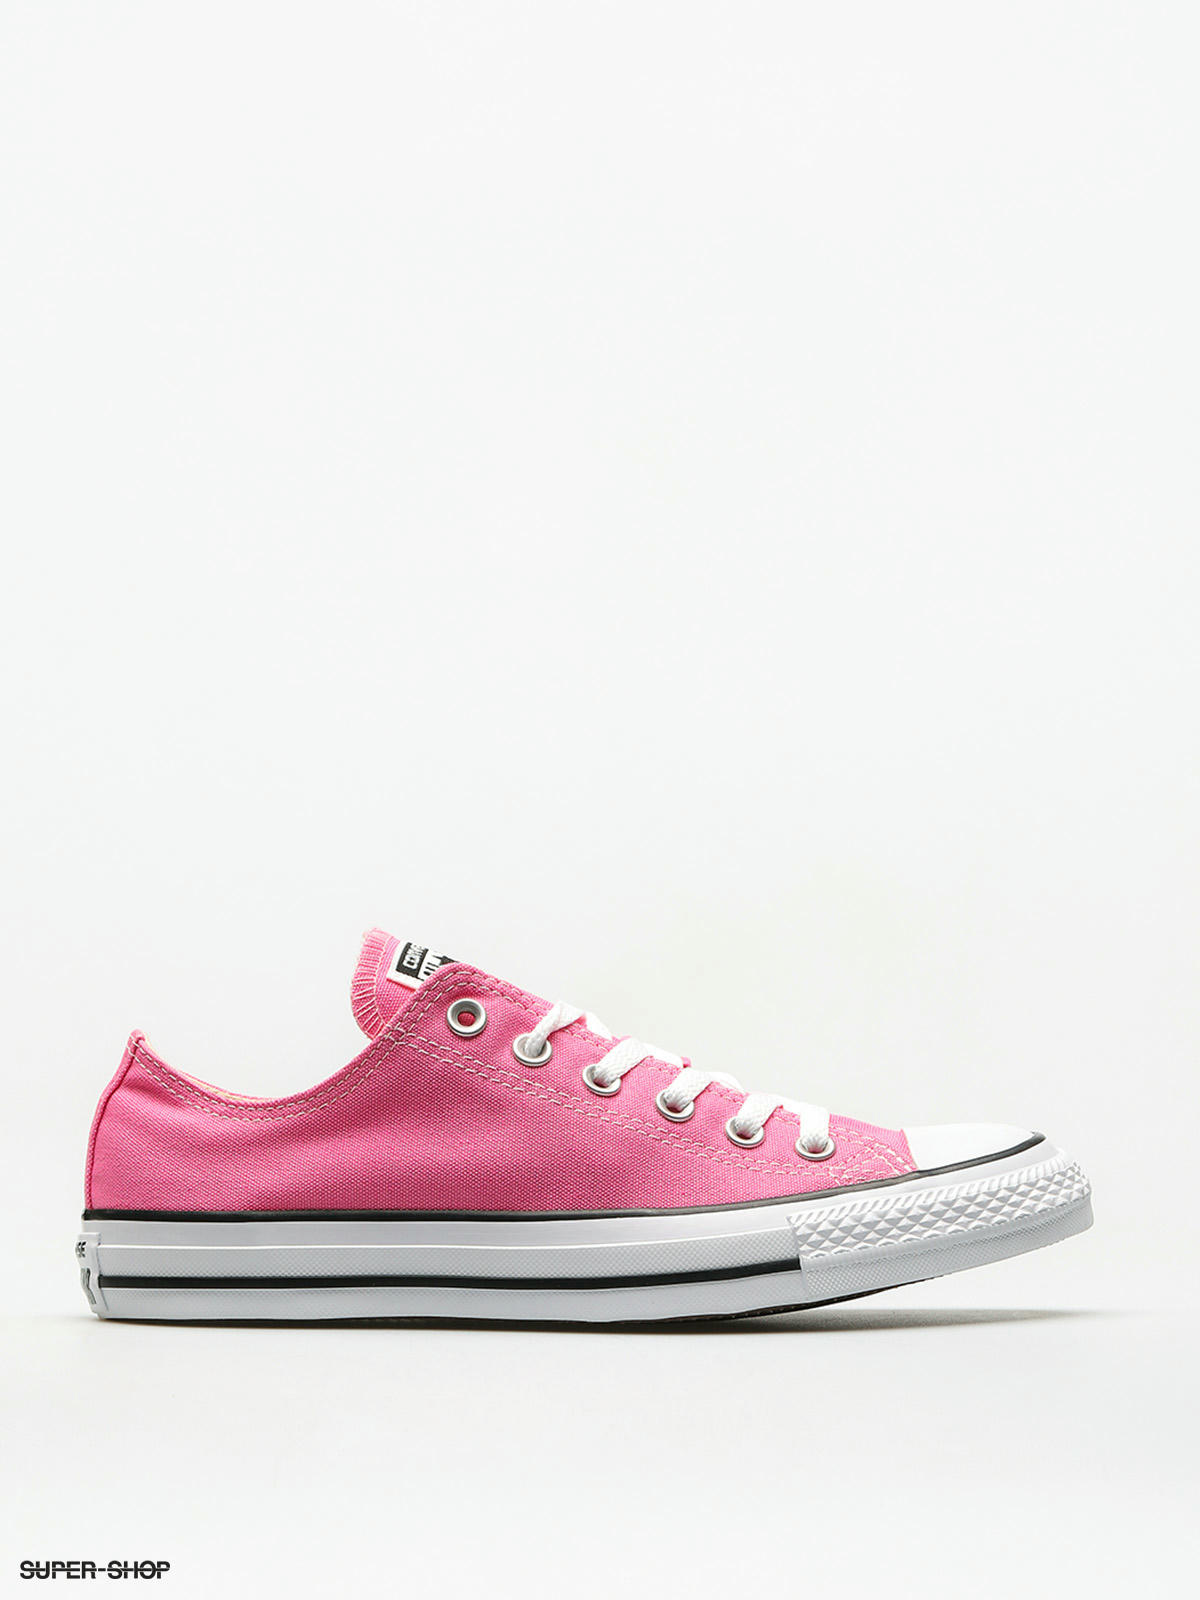 company that manufactures chuck taylor sneakers